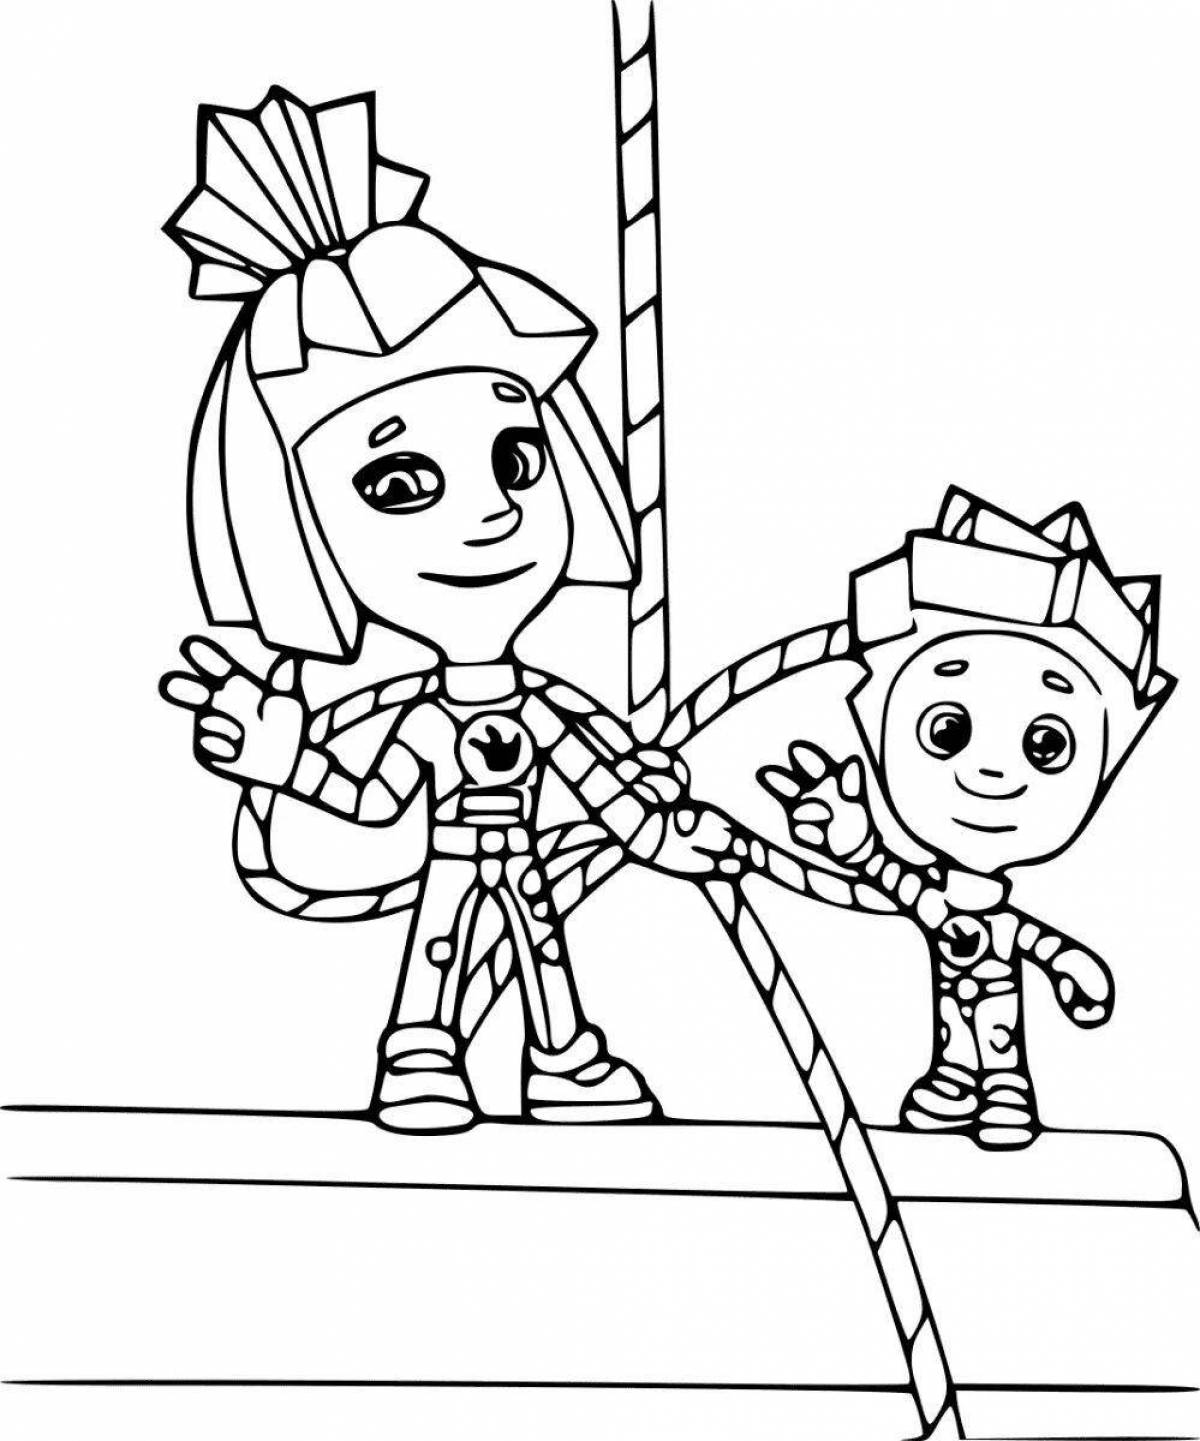 Dazzling fixies coloring pages for girls